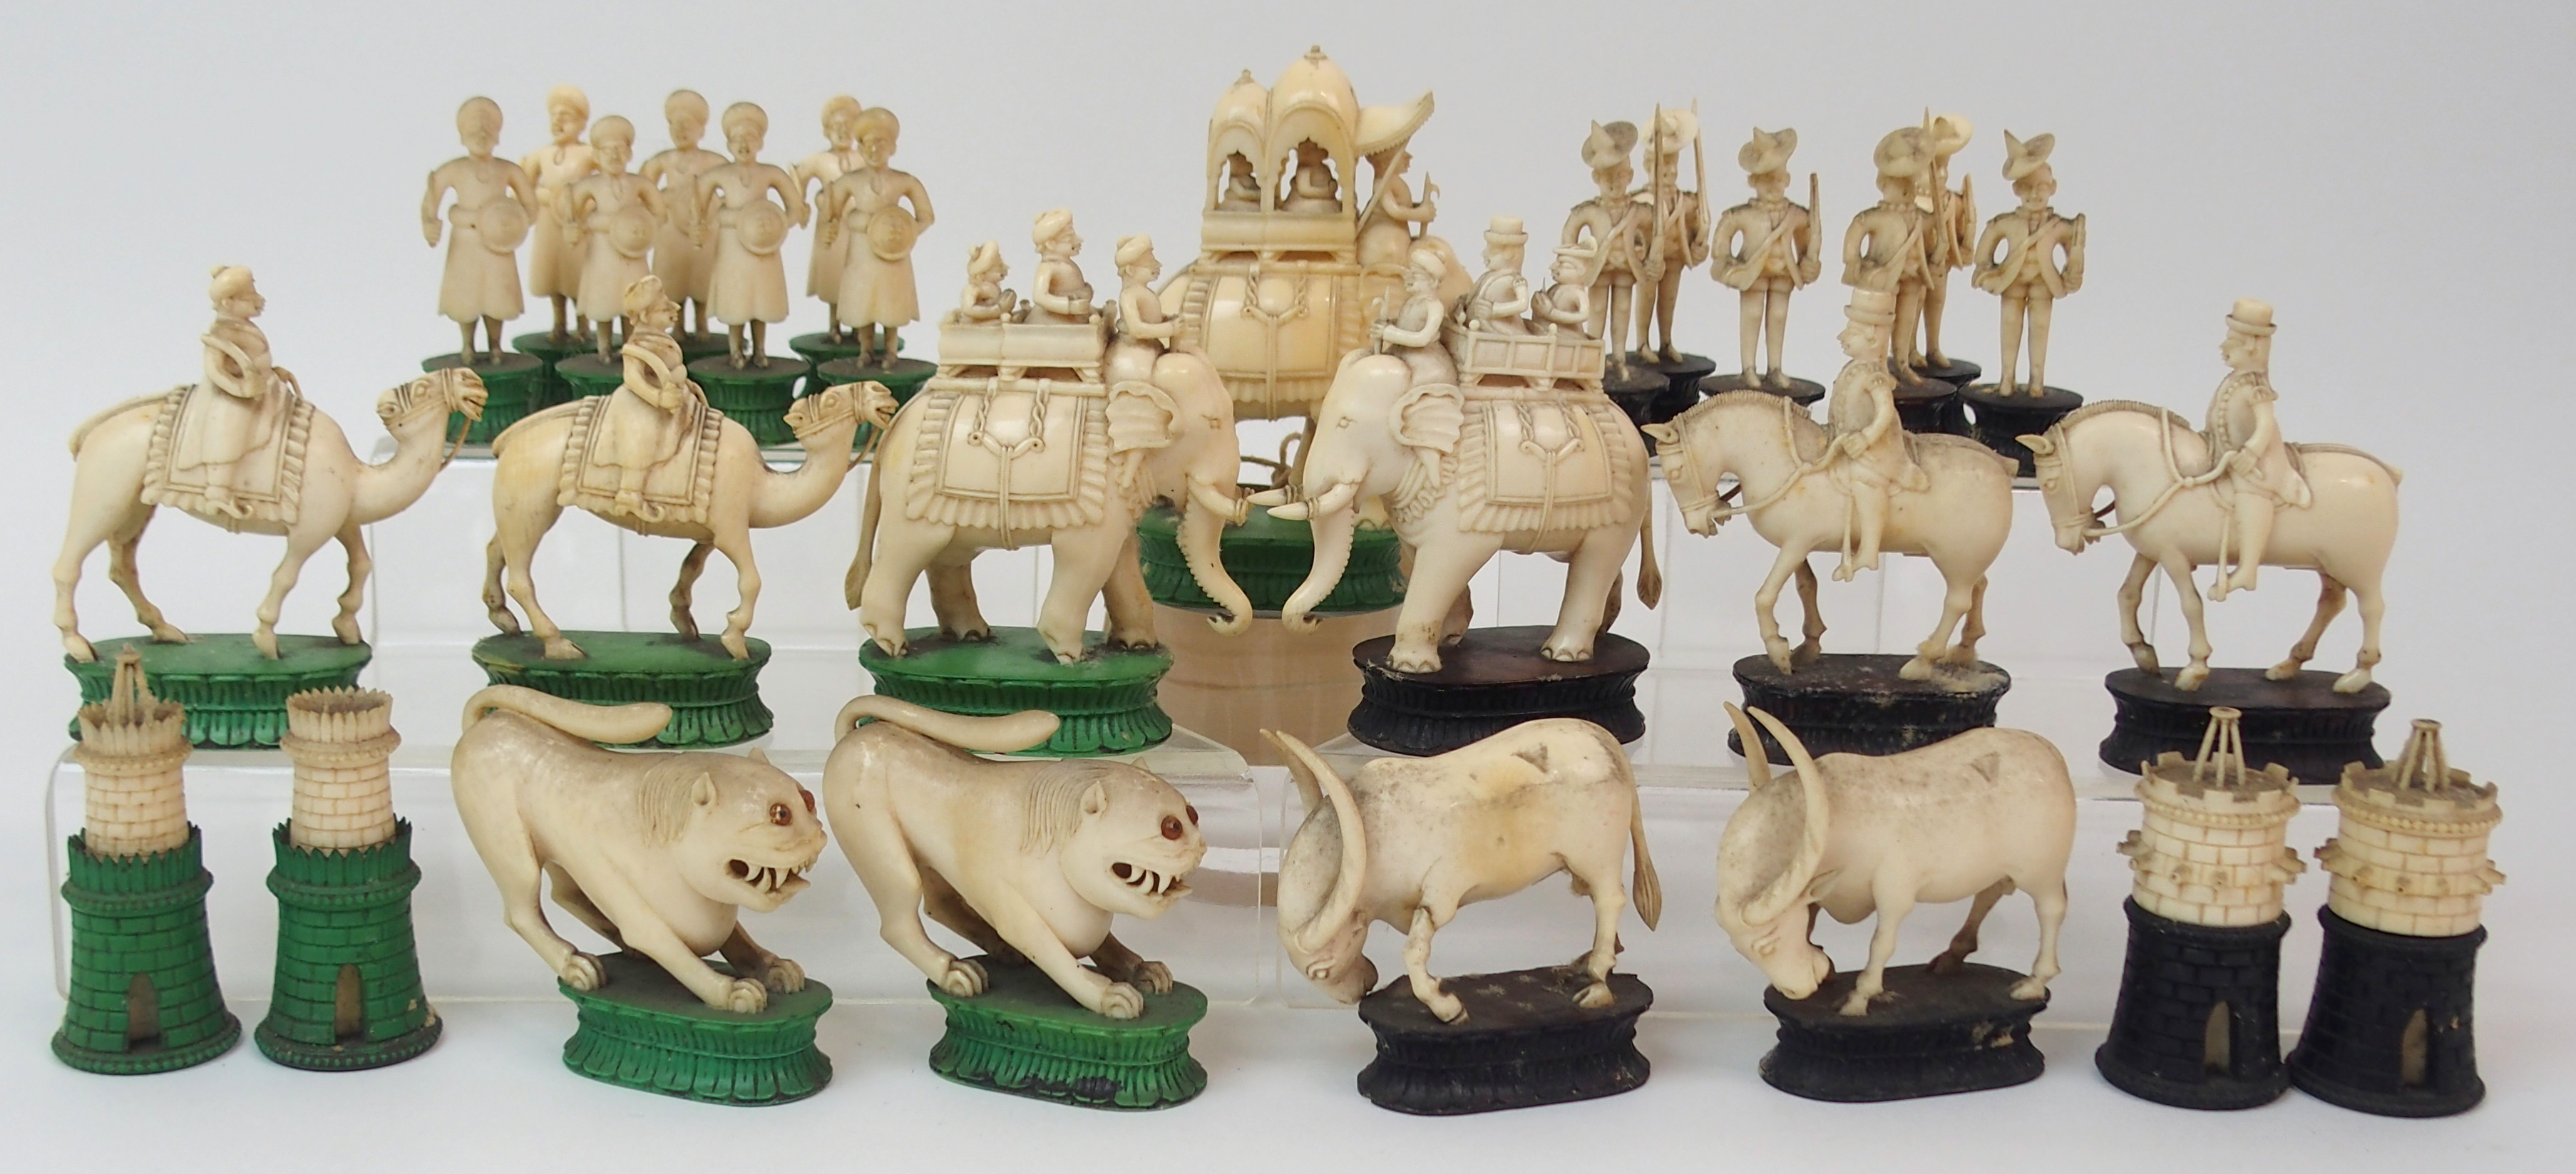 AN EAST INDIAN IVORY CHESS SET probably Berhampore, one set with black stained bases lacking two - Image 12 of 28